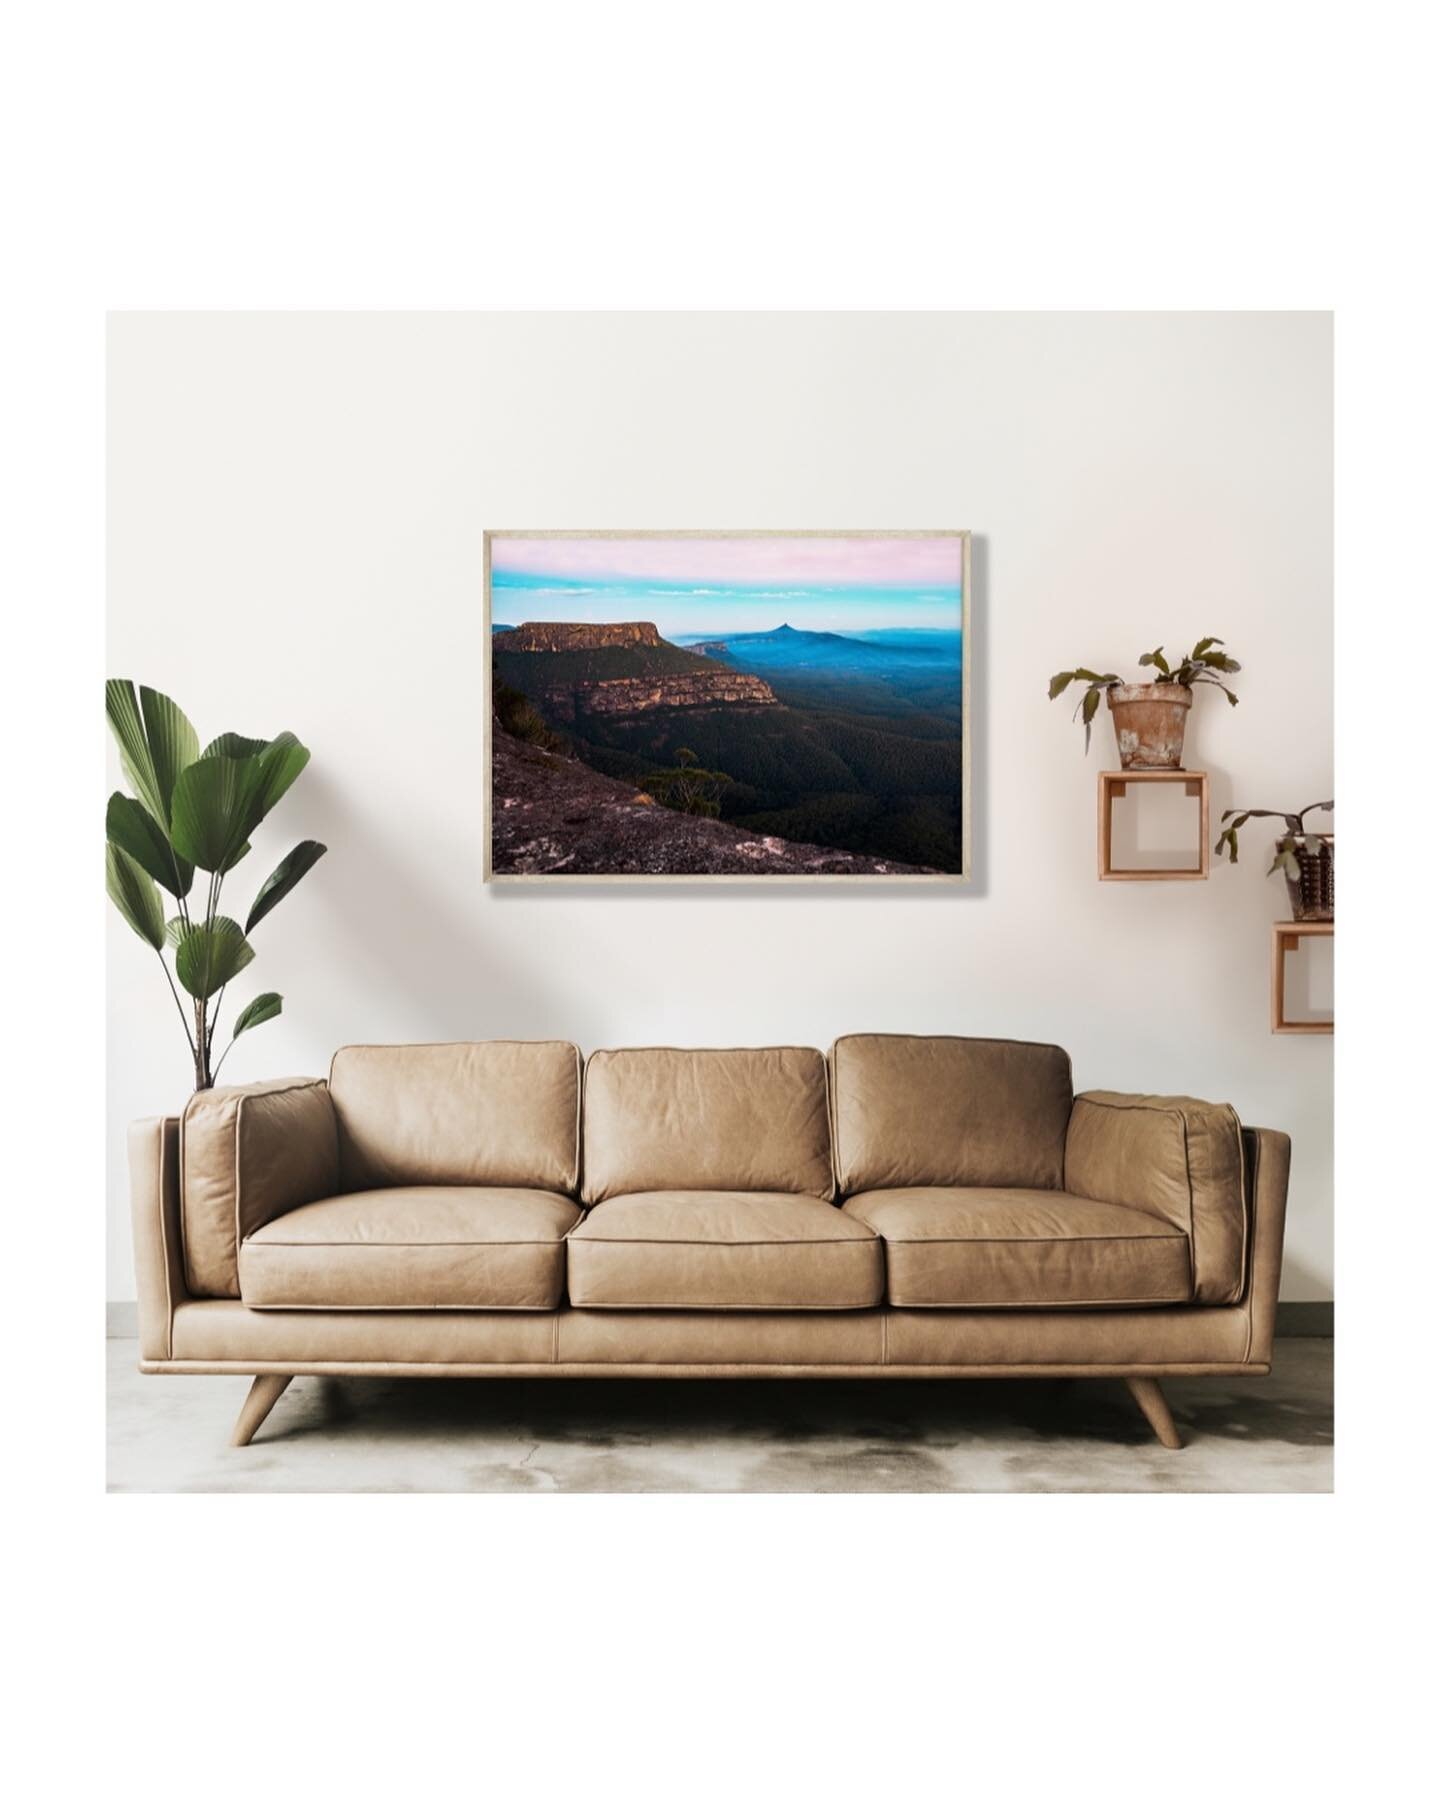 🎅🏼CHRISTMAS SALE🎄
Spoil your loved one with a slice of beauty for their wall 😊
20% OFF till December the 18th!
Make sure to use the code SW20%OFF at checkout.